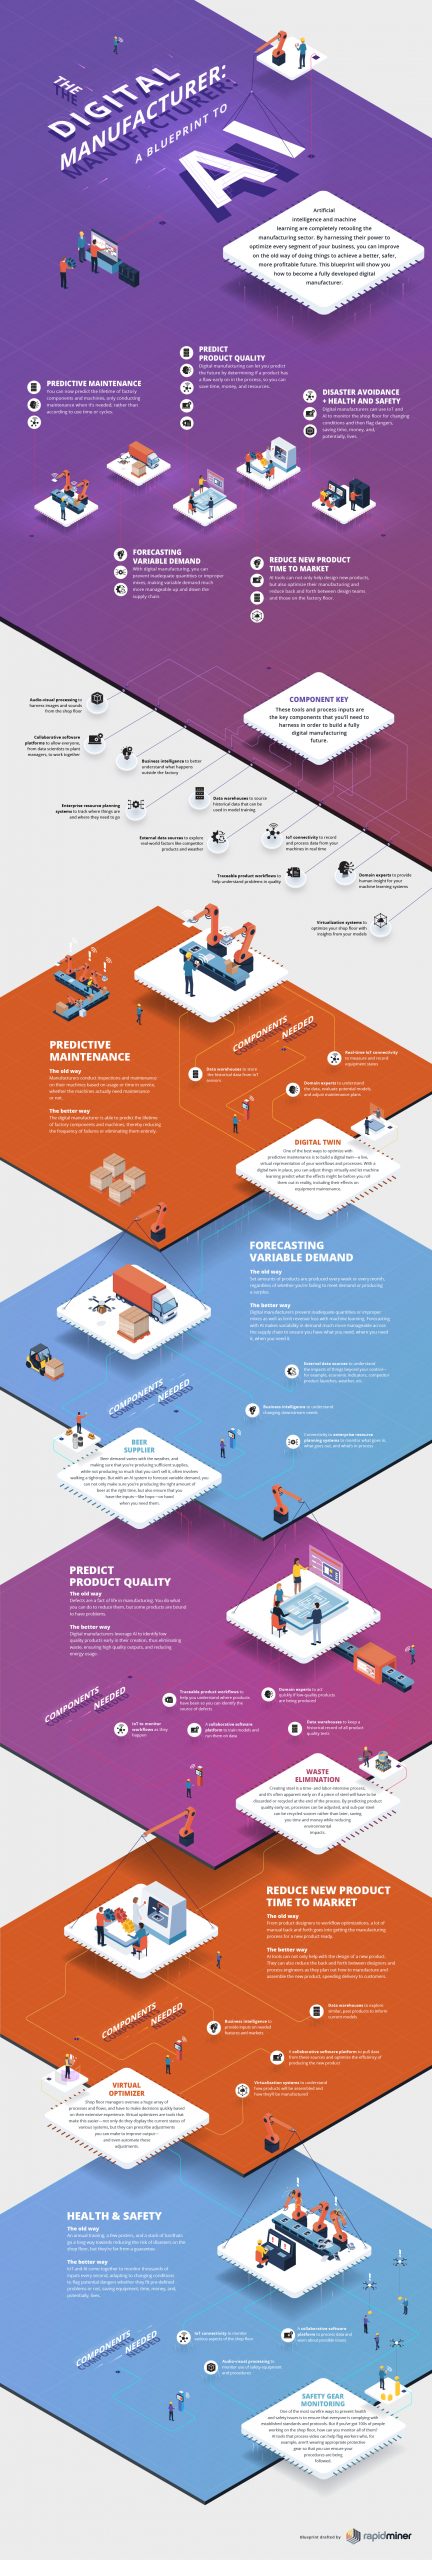 Digital Manufacturing Infographic RapidMiner 112020 Scaled, Industry Today